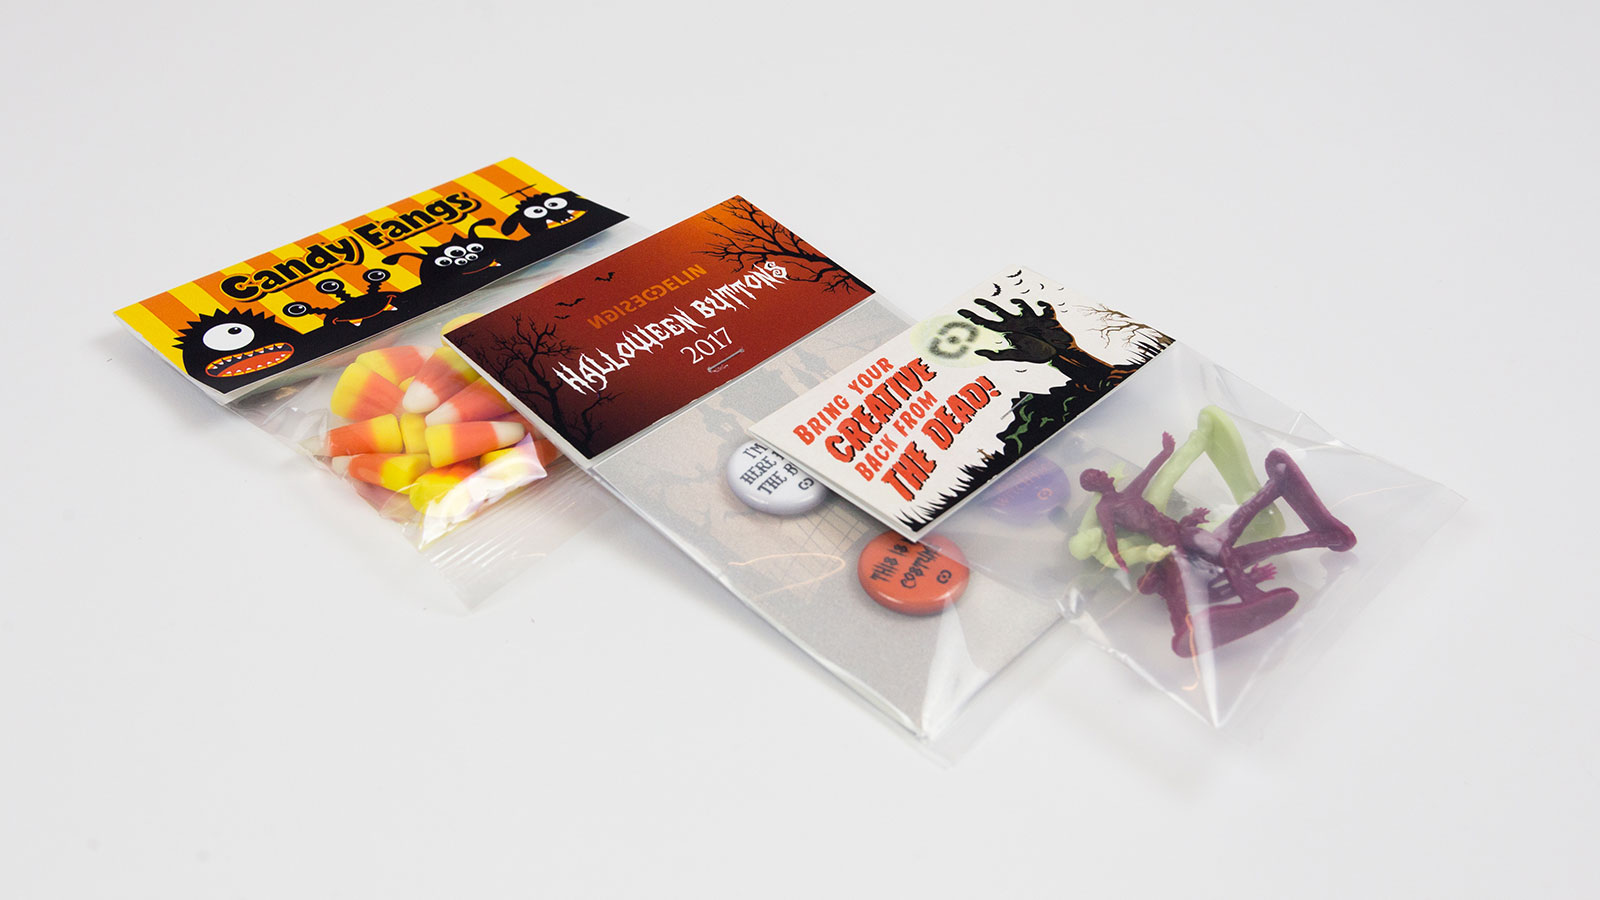 Delin Design Halloween 2017 Goodie Bag Promotion – Candy Corn, 1" Buttons, and Zombies Packaging Design